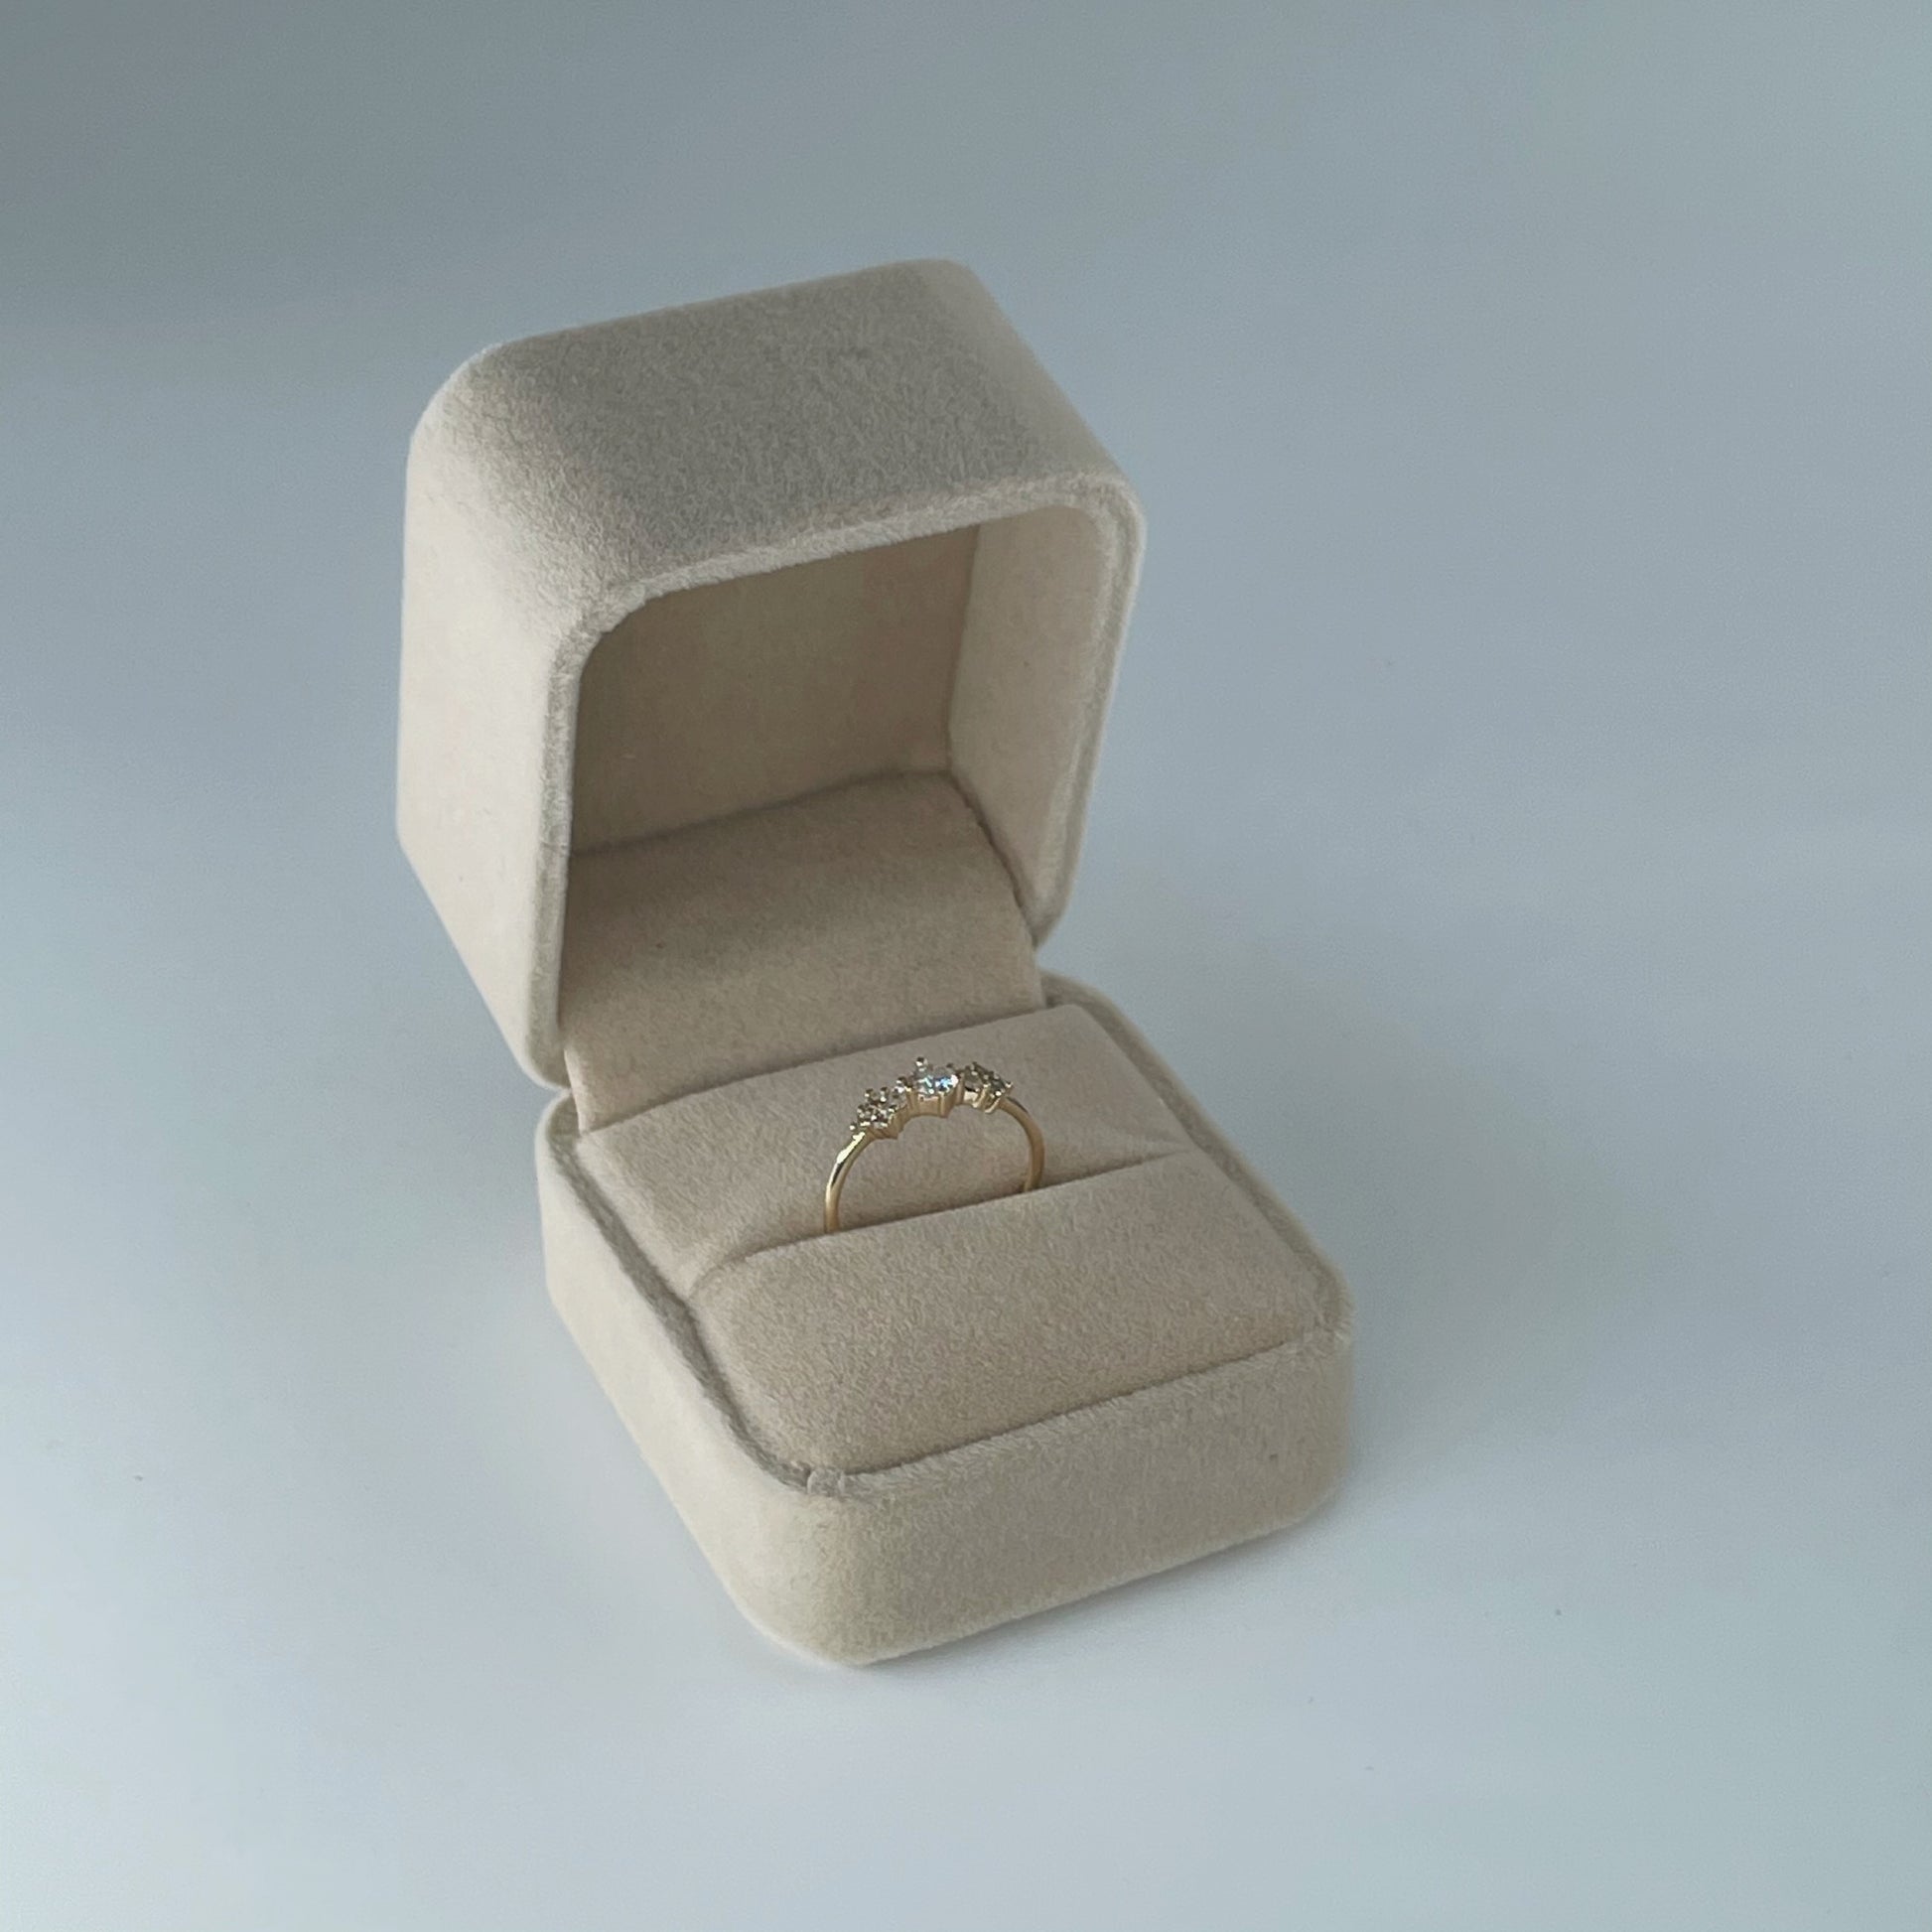 Velvet ring box in nude colour, displayed open with gold ring inside